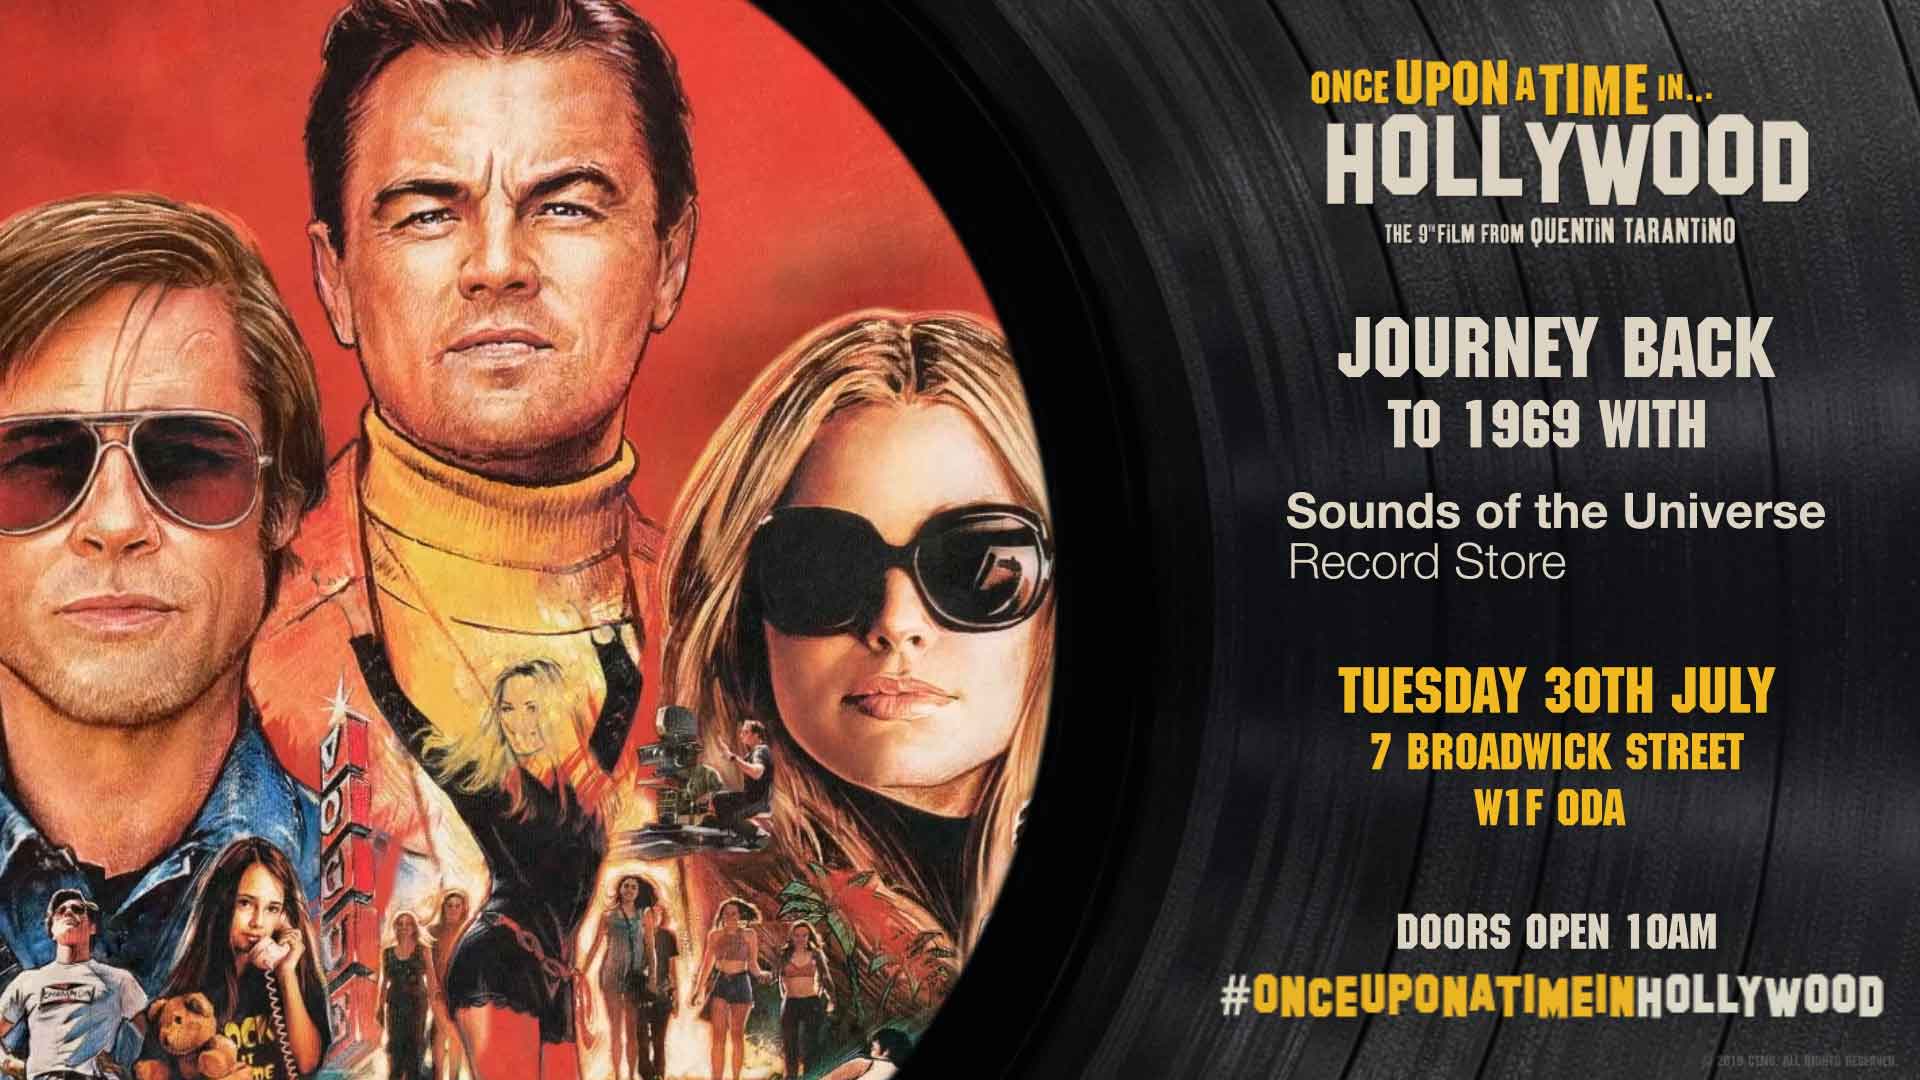 Once Upon a Time in Hollywood DVD and Blu-ray